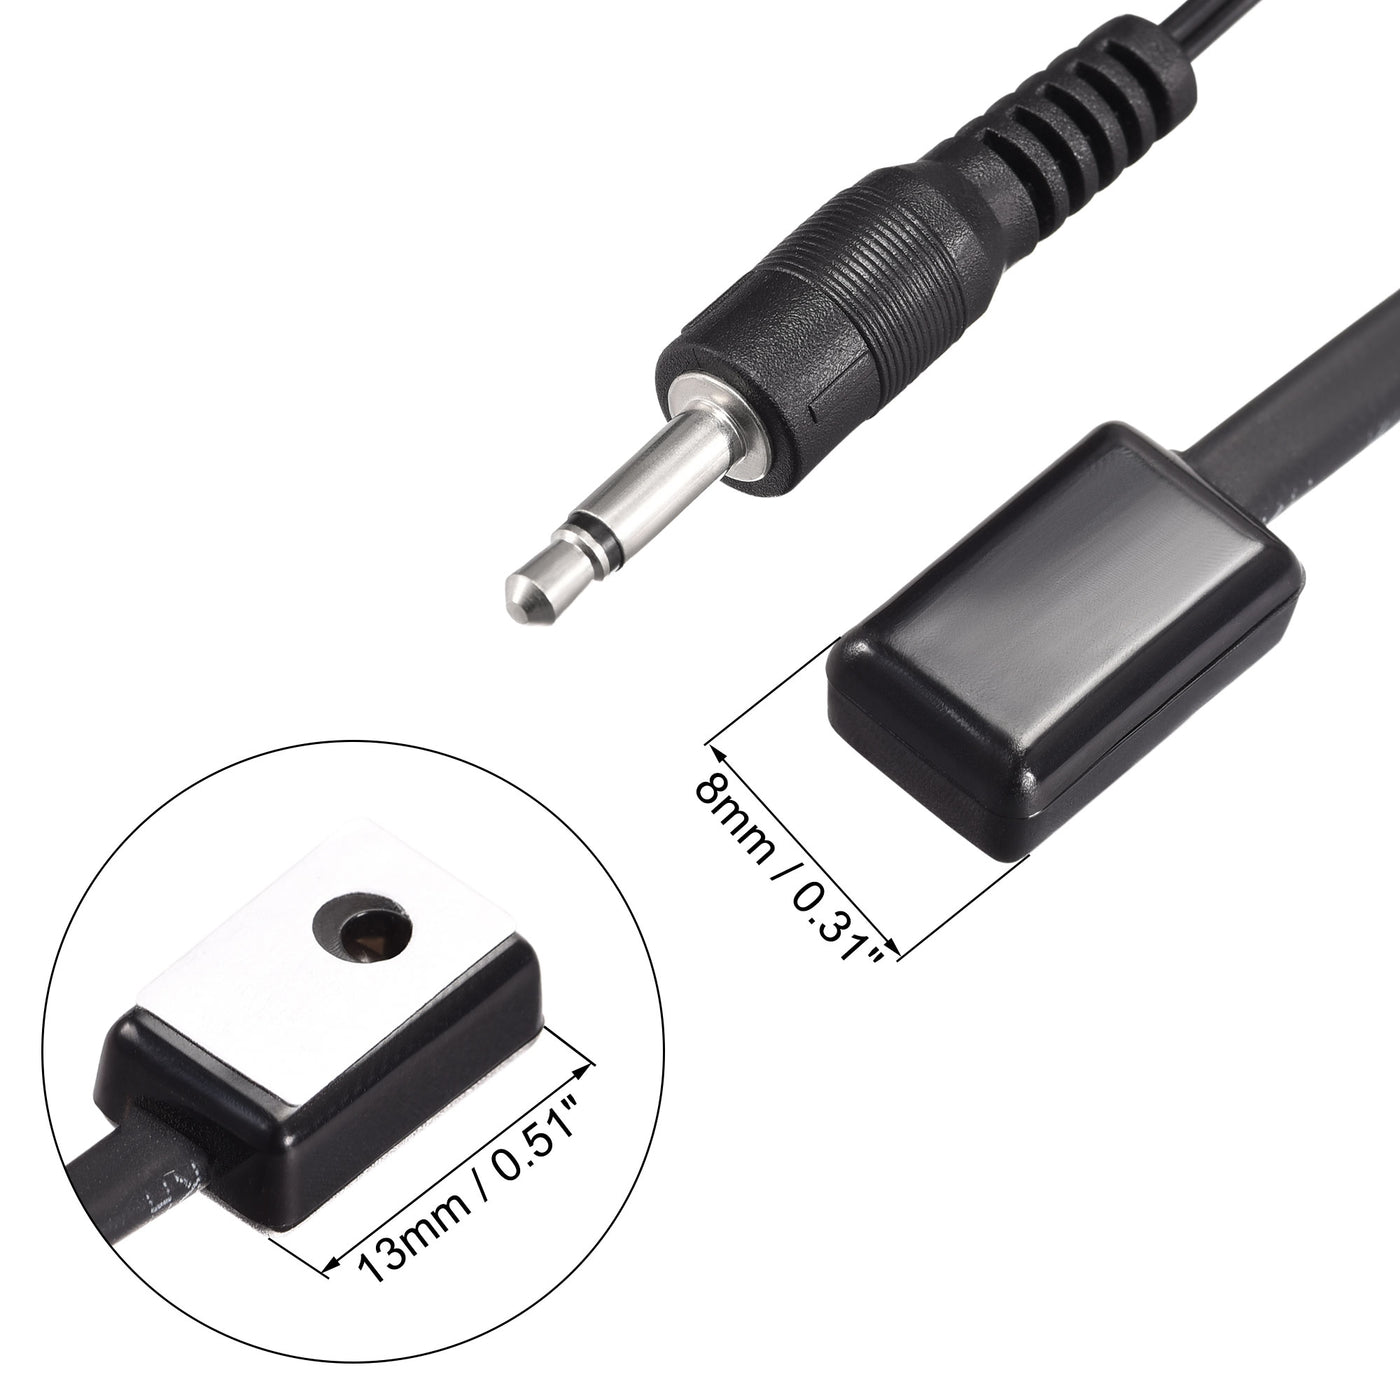 uxcell Uxcell IR Infrared Emitter Extension Cable 9.8ft Long 45 Degree Emission Angle 3.5mm Jack 2 Black Head 2pcs